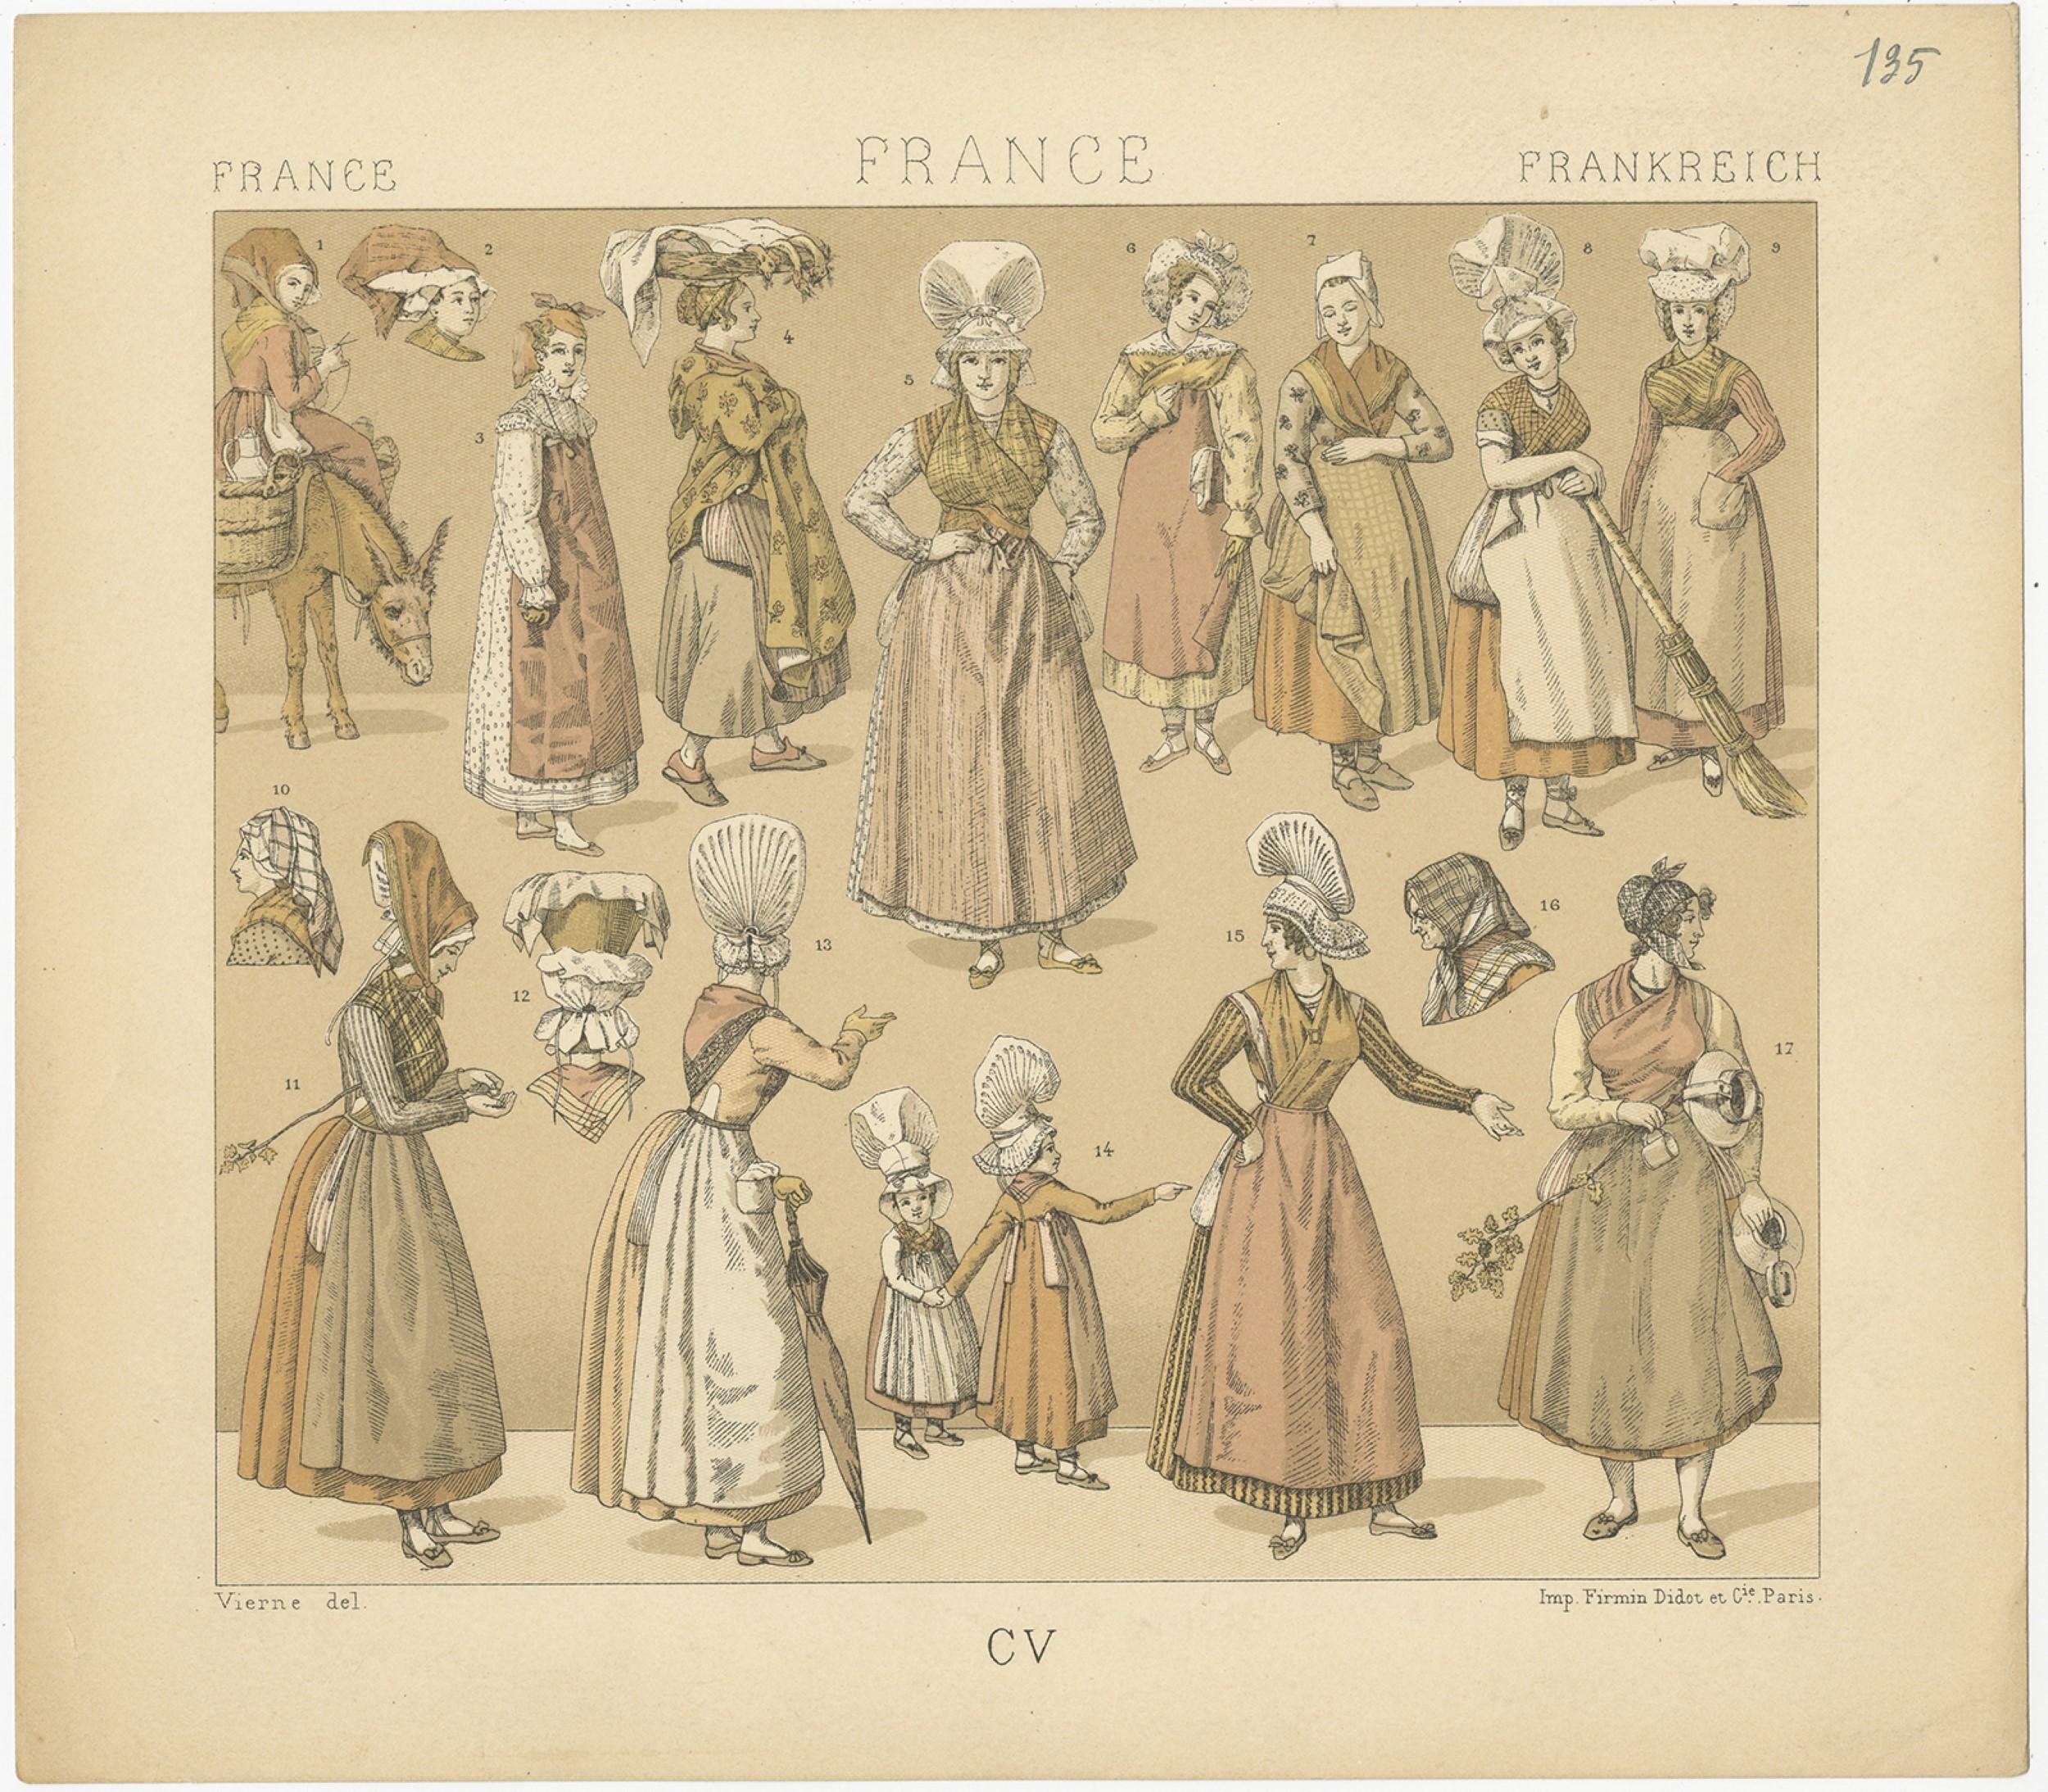 Antique print titled 'France - France - Frankreich'. Chromolithograph of French Women's Outfits. This print originates from 'Le Costume Historique' by M.A. Racinet. Published, circa 1880.

  